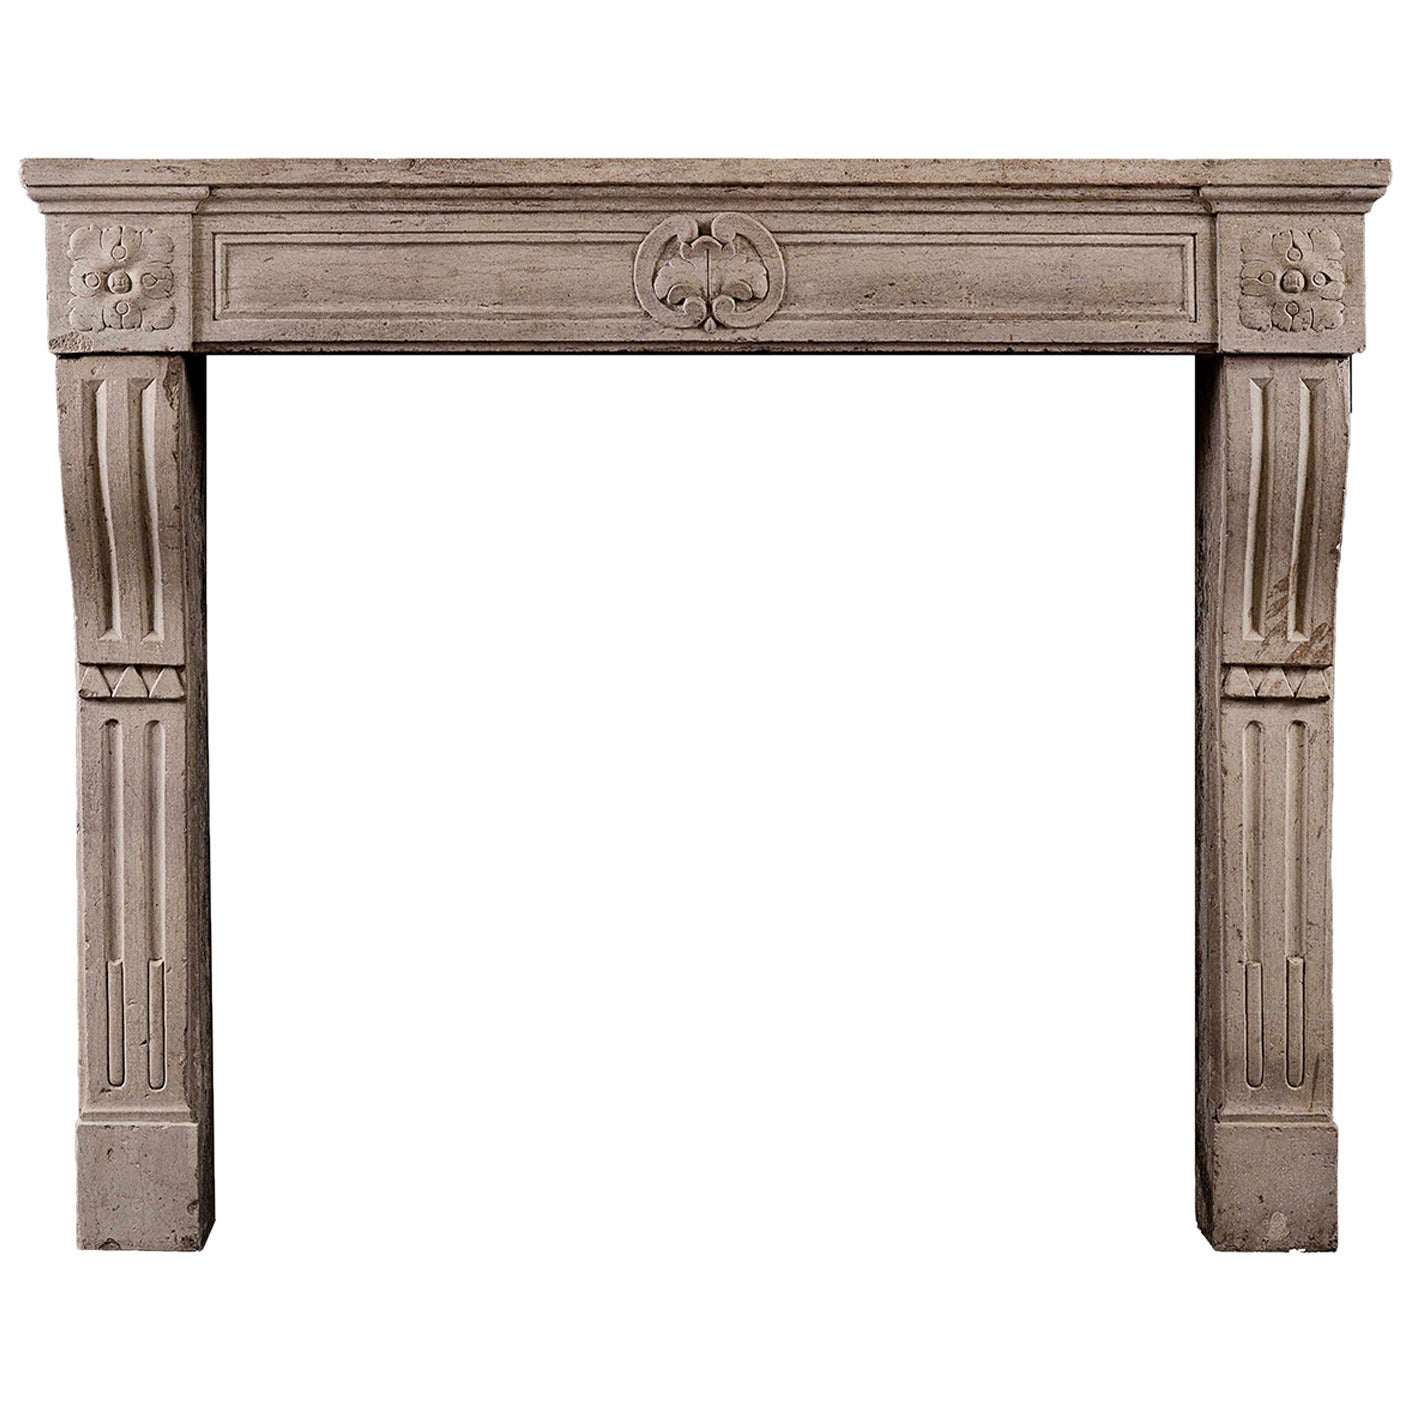 What is a good depth for a fireplace mantel?